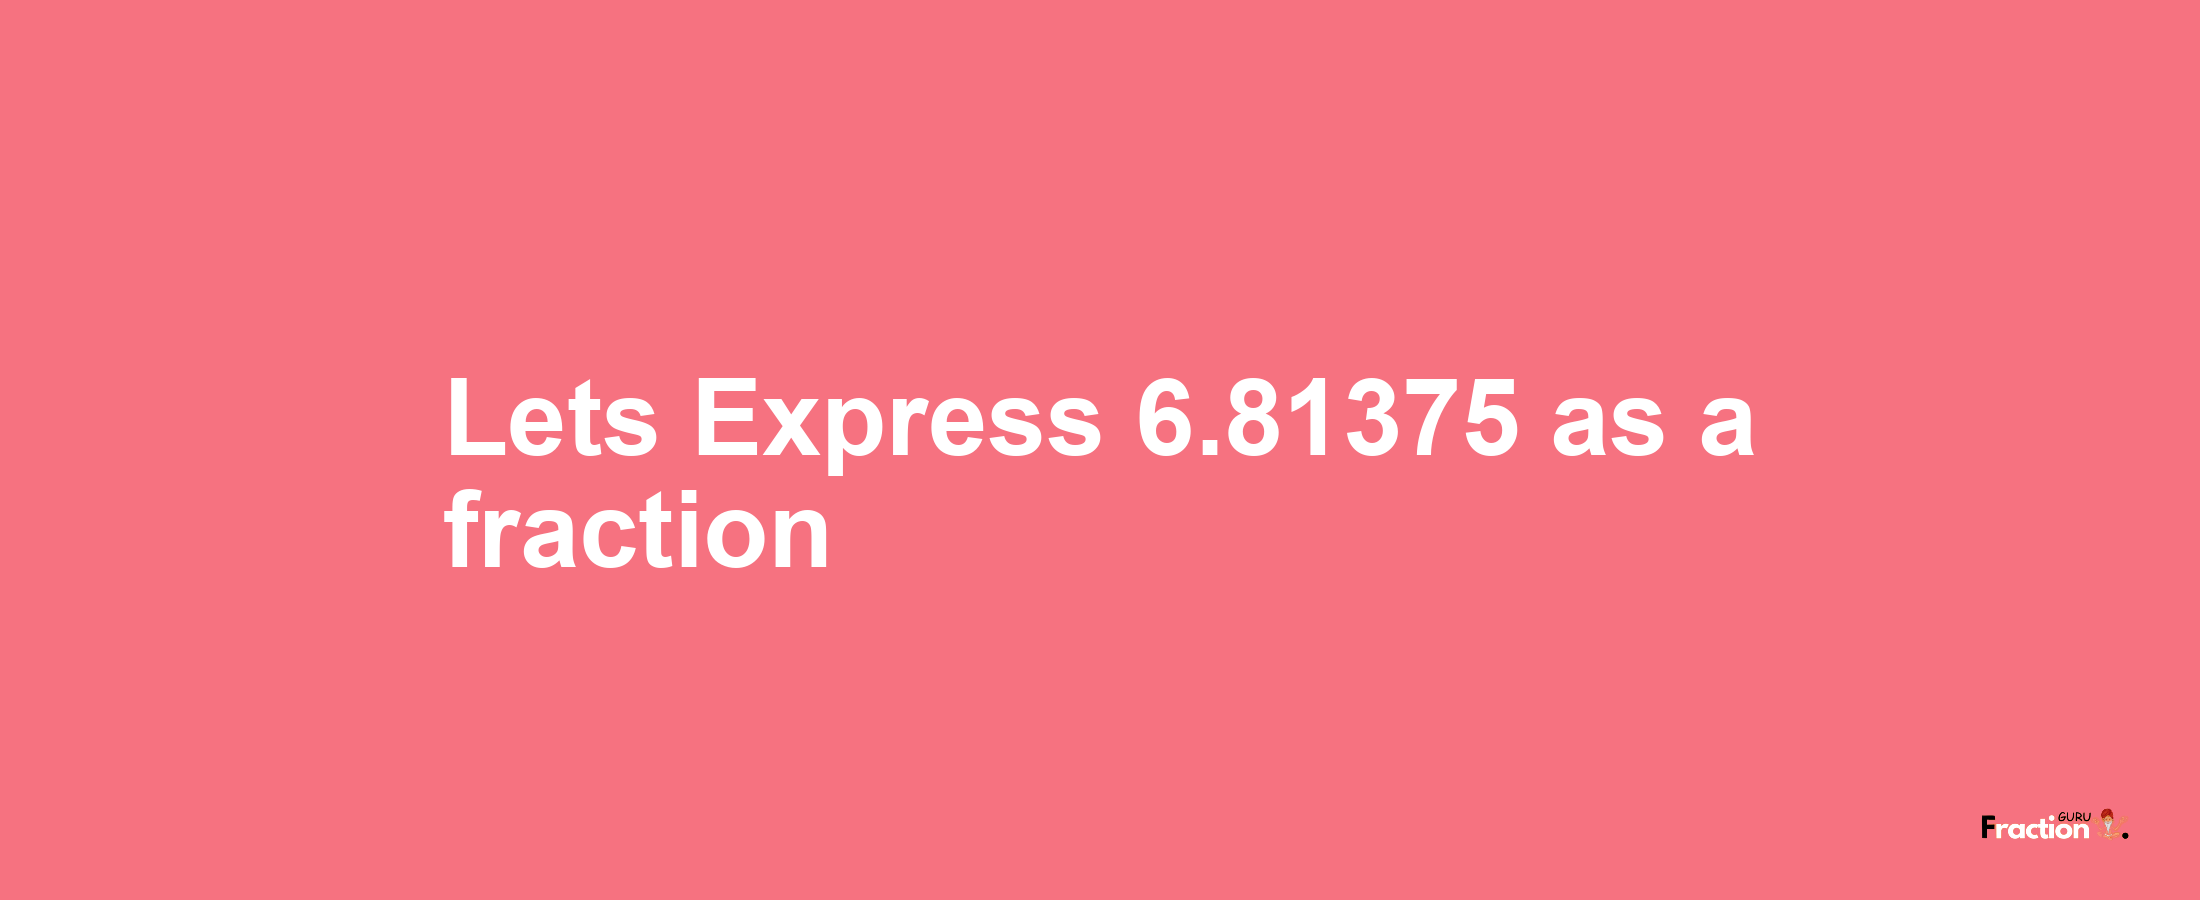 Lets Express 6.81375 as afraction